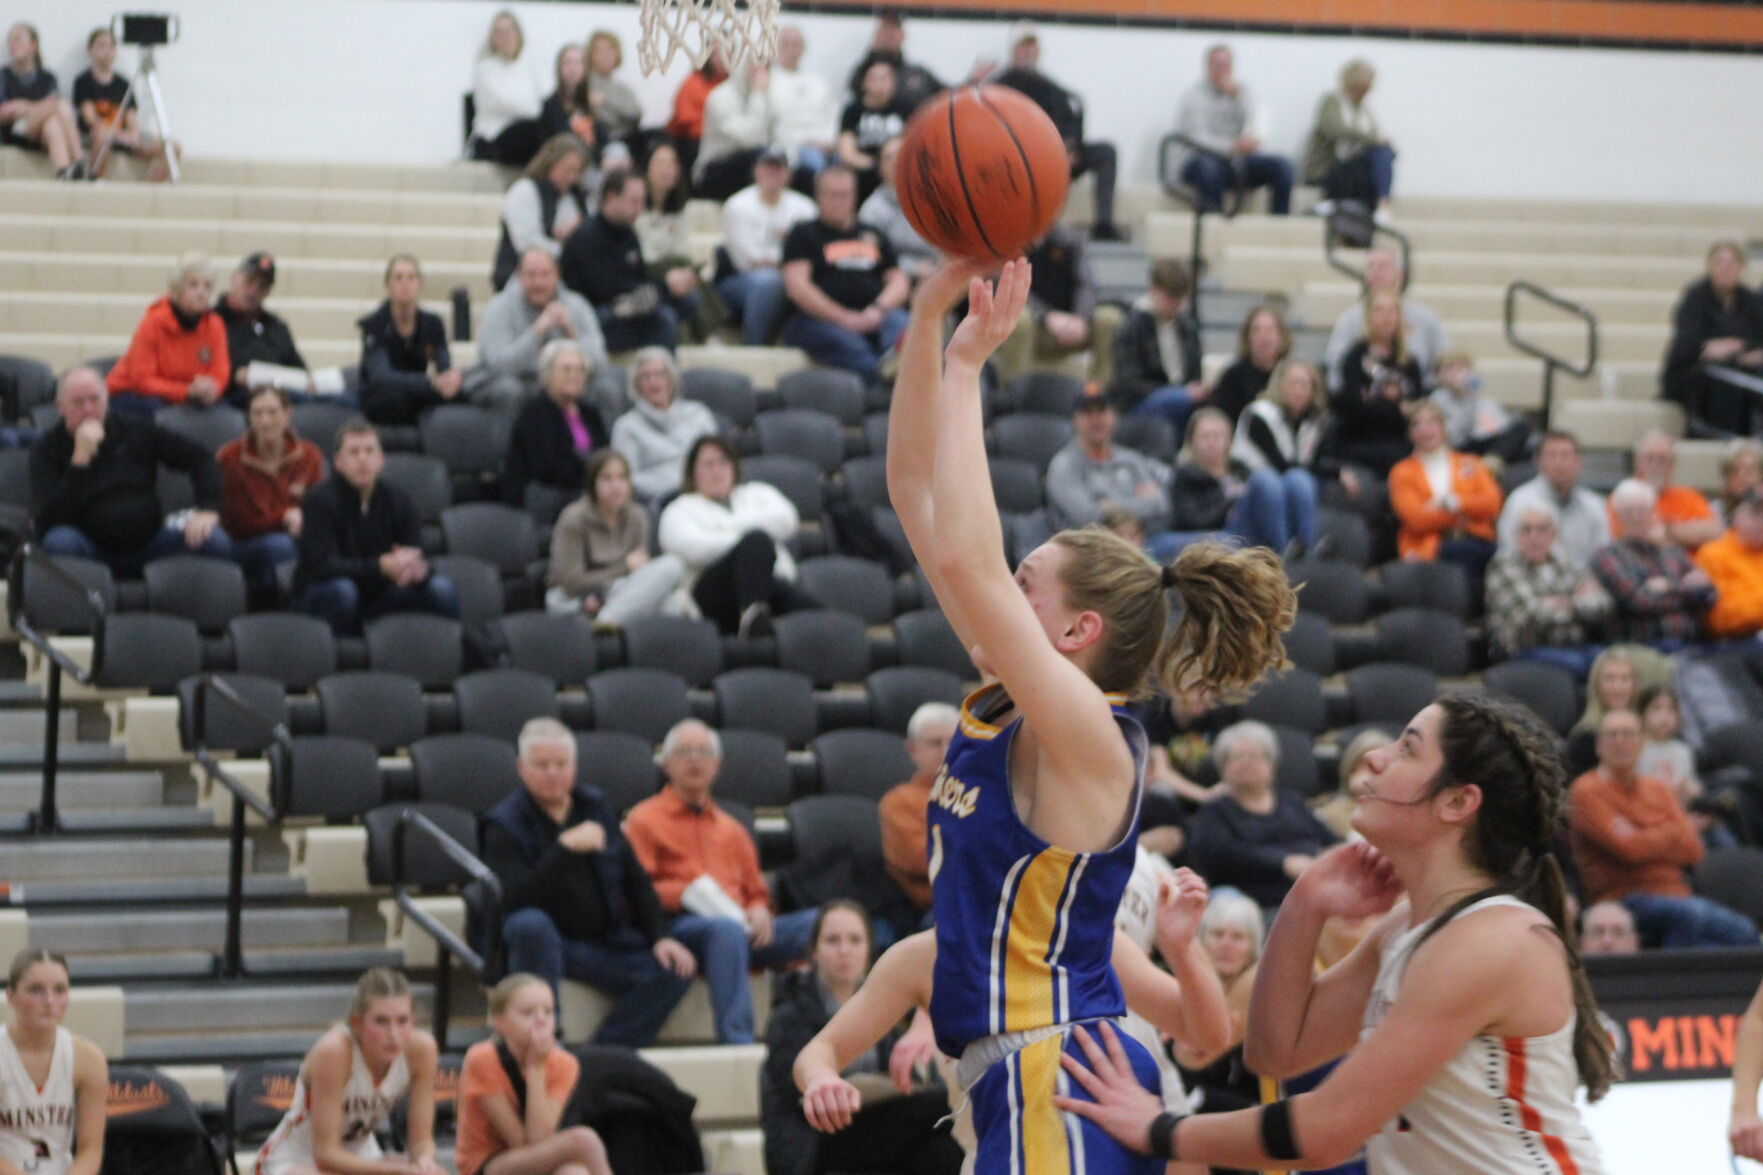 Minster Lady Wildcats defeat St. Mary’s Roughriders in 42-23 victory